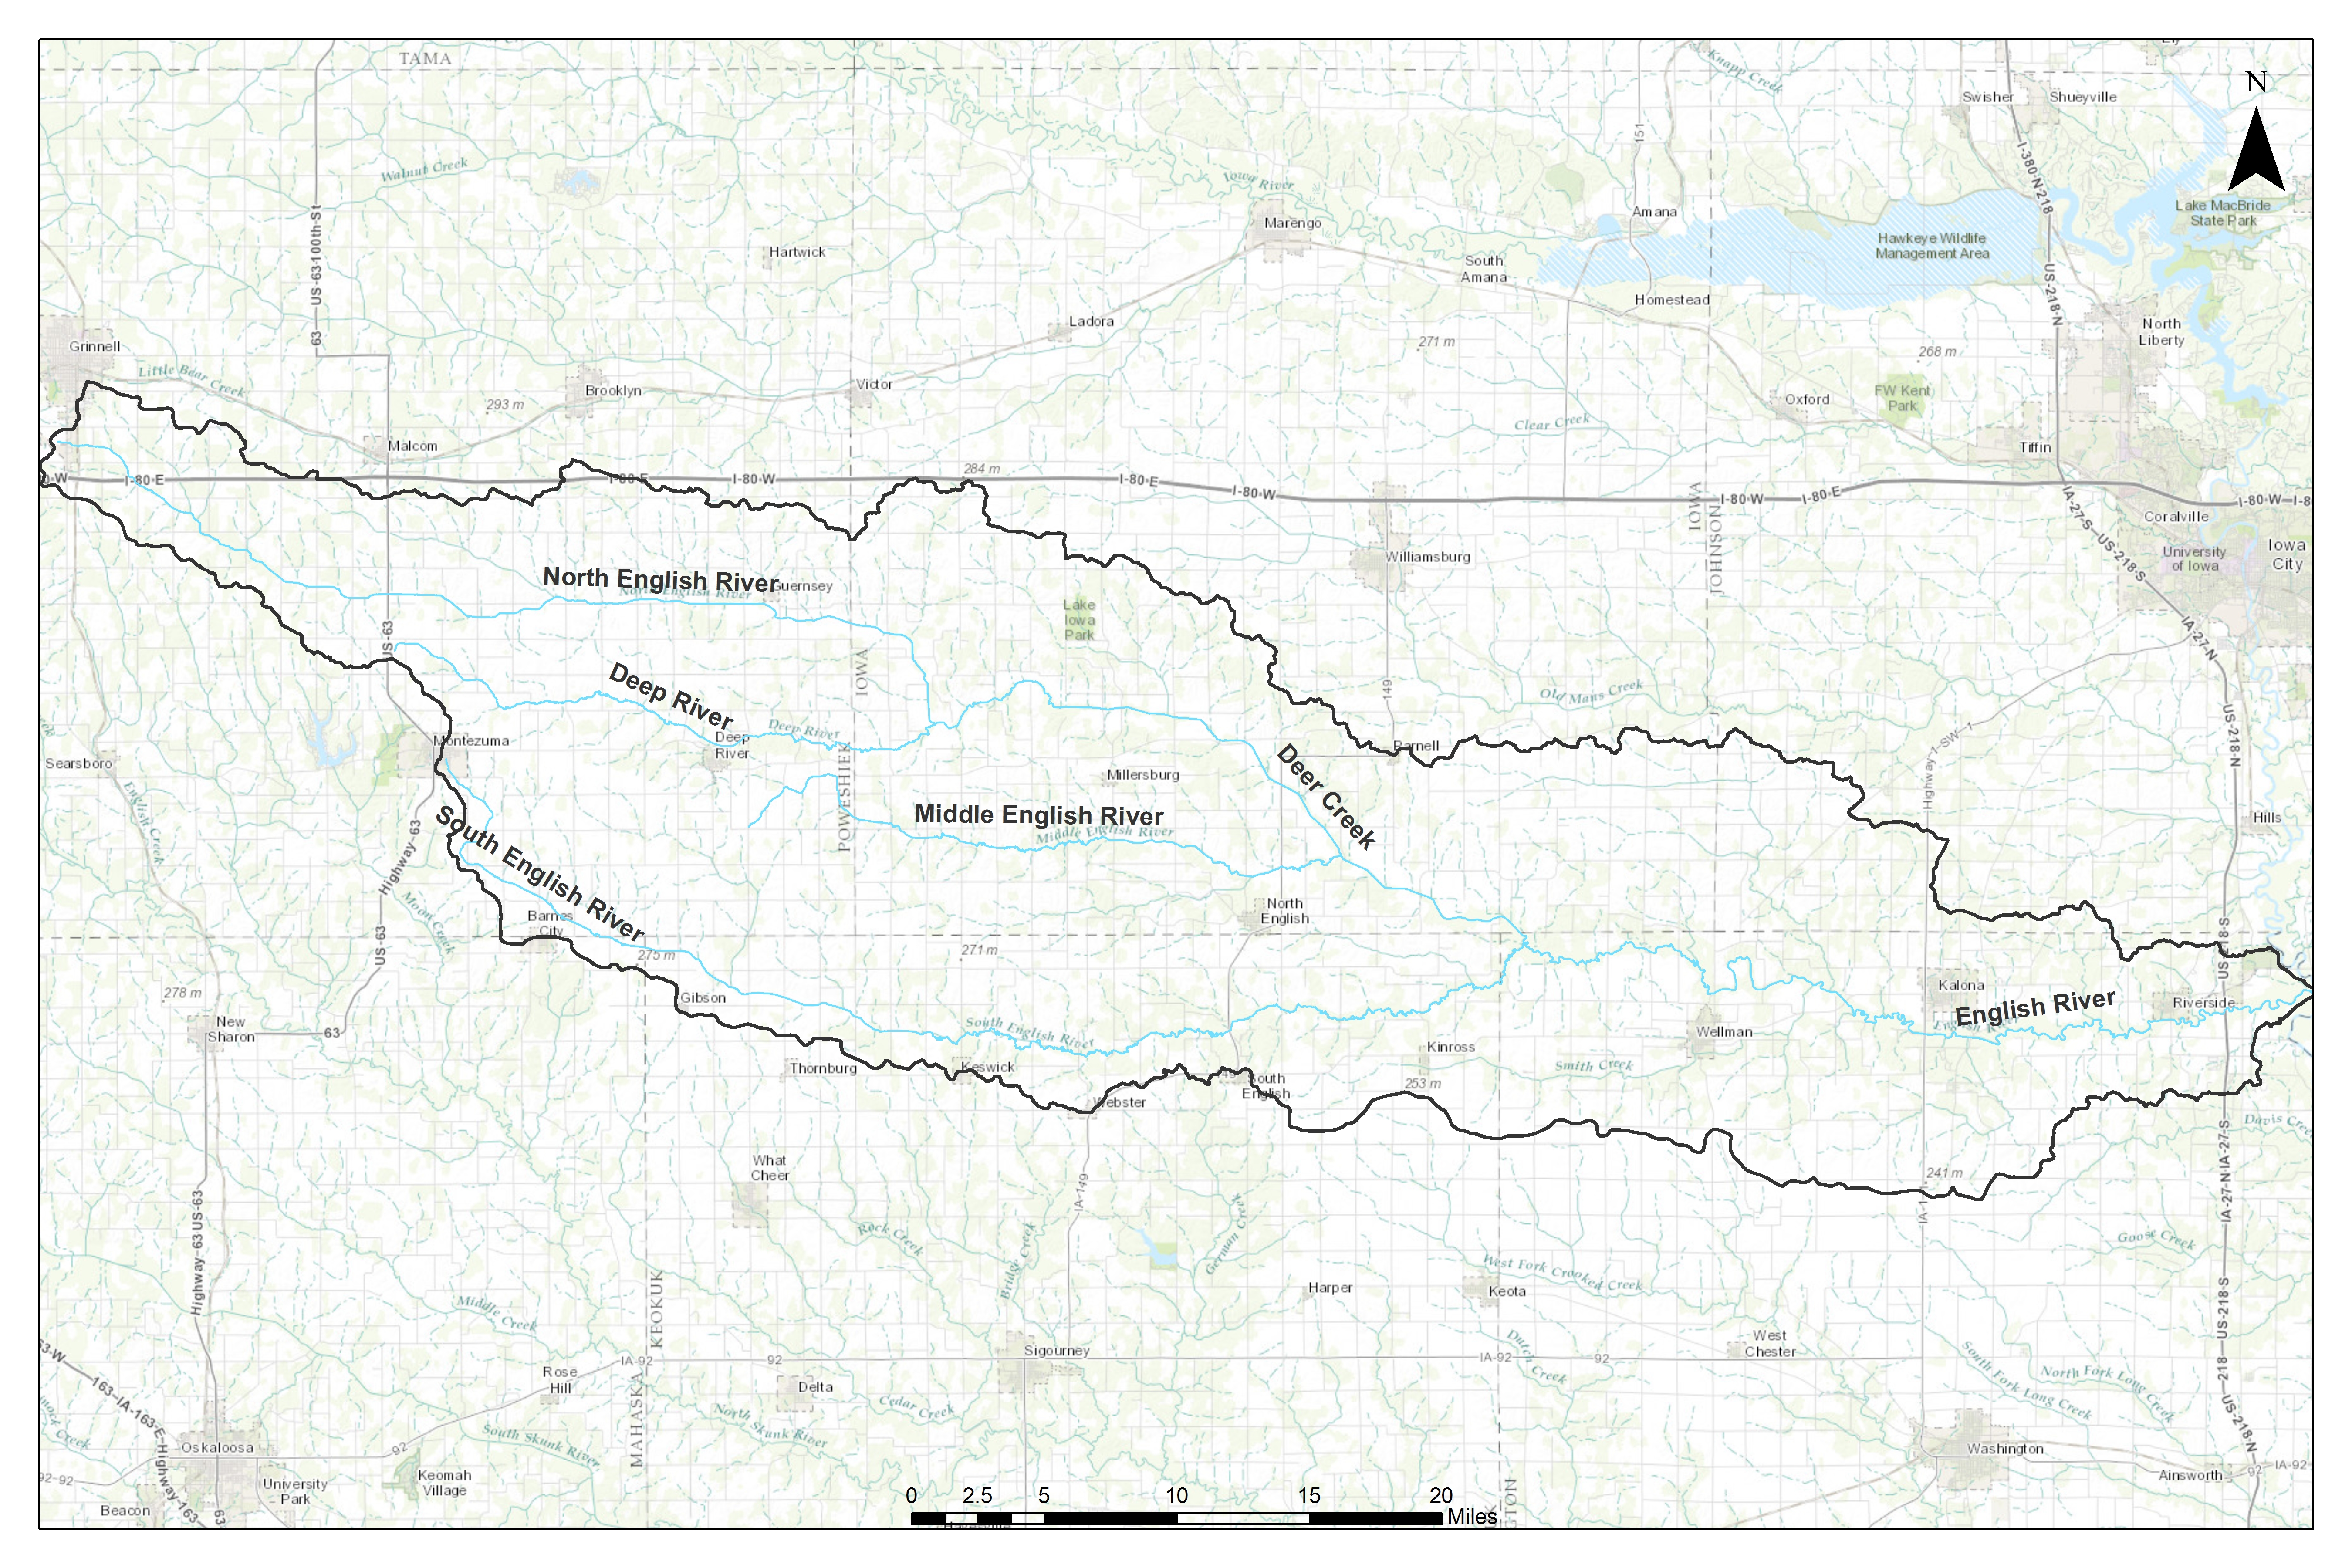 English River Watershed 4 Rivers Map for CWMP